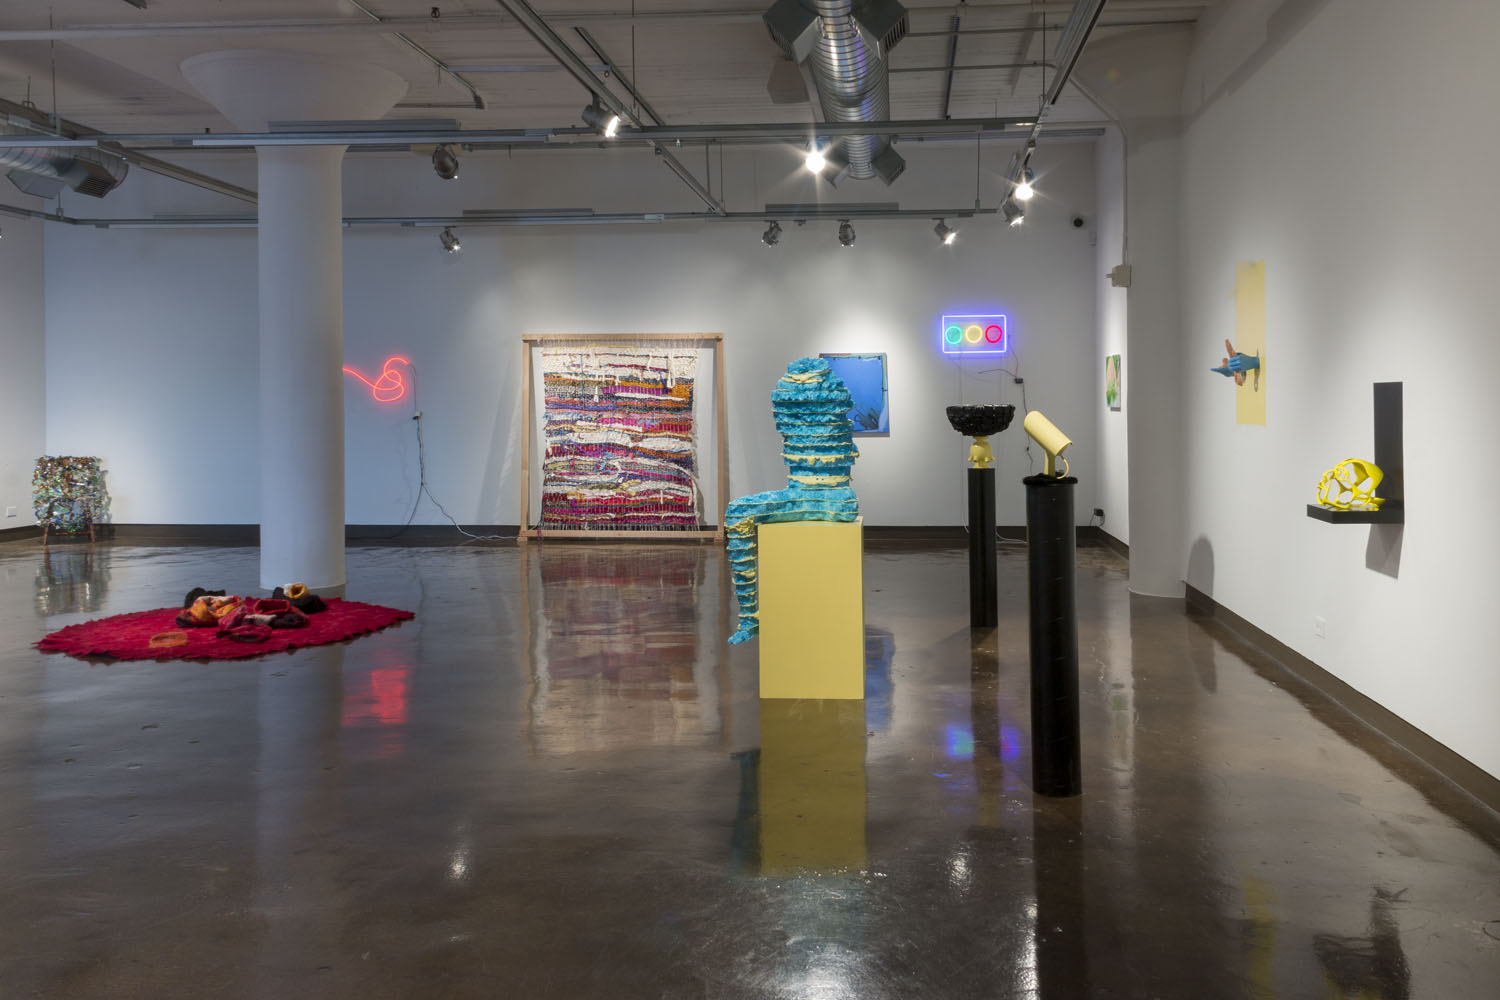 Installation view of blue anthropomorphic sculpture, a red rug with fabric pieces, and other objects.